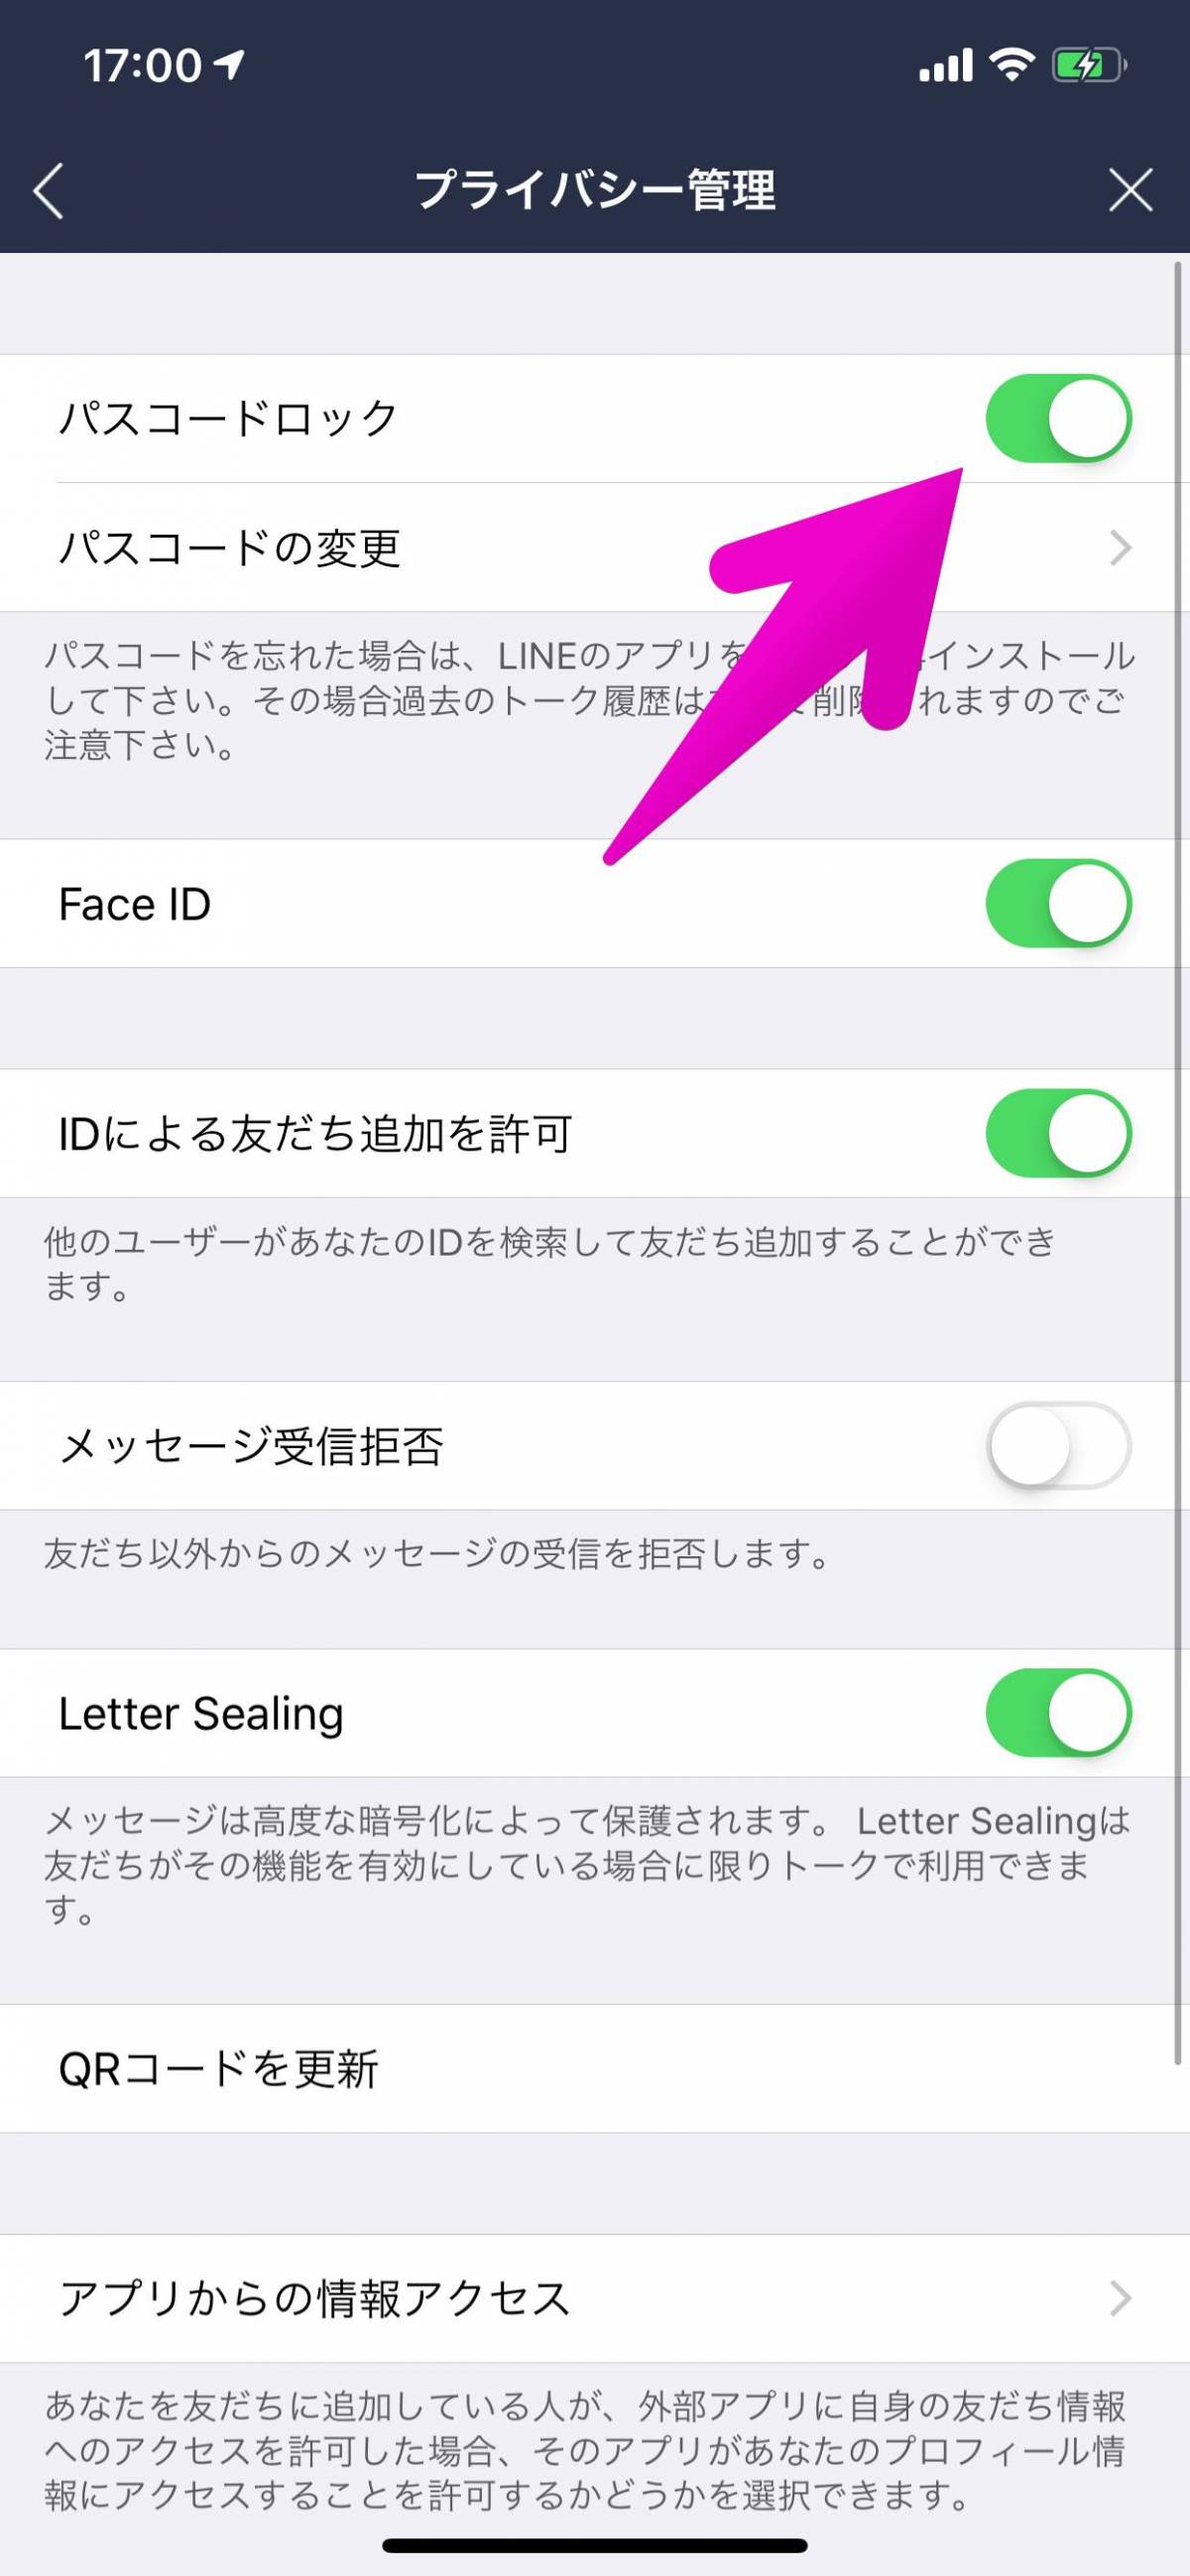 Line パスコードロック の設定 変更 解除方法 Iphone Android Appliv Topics